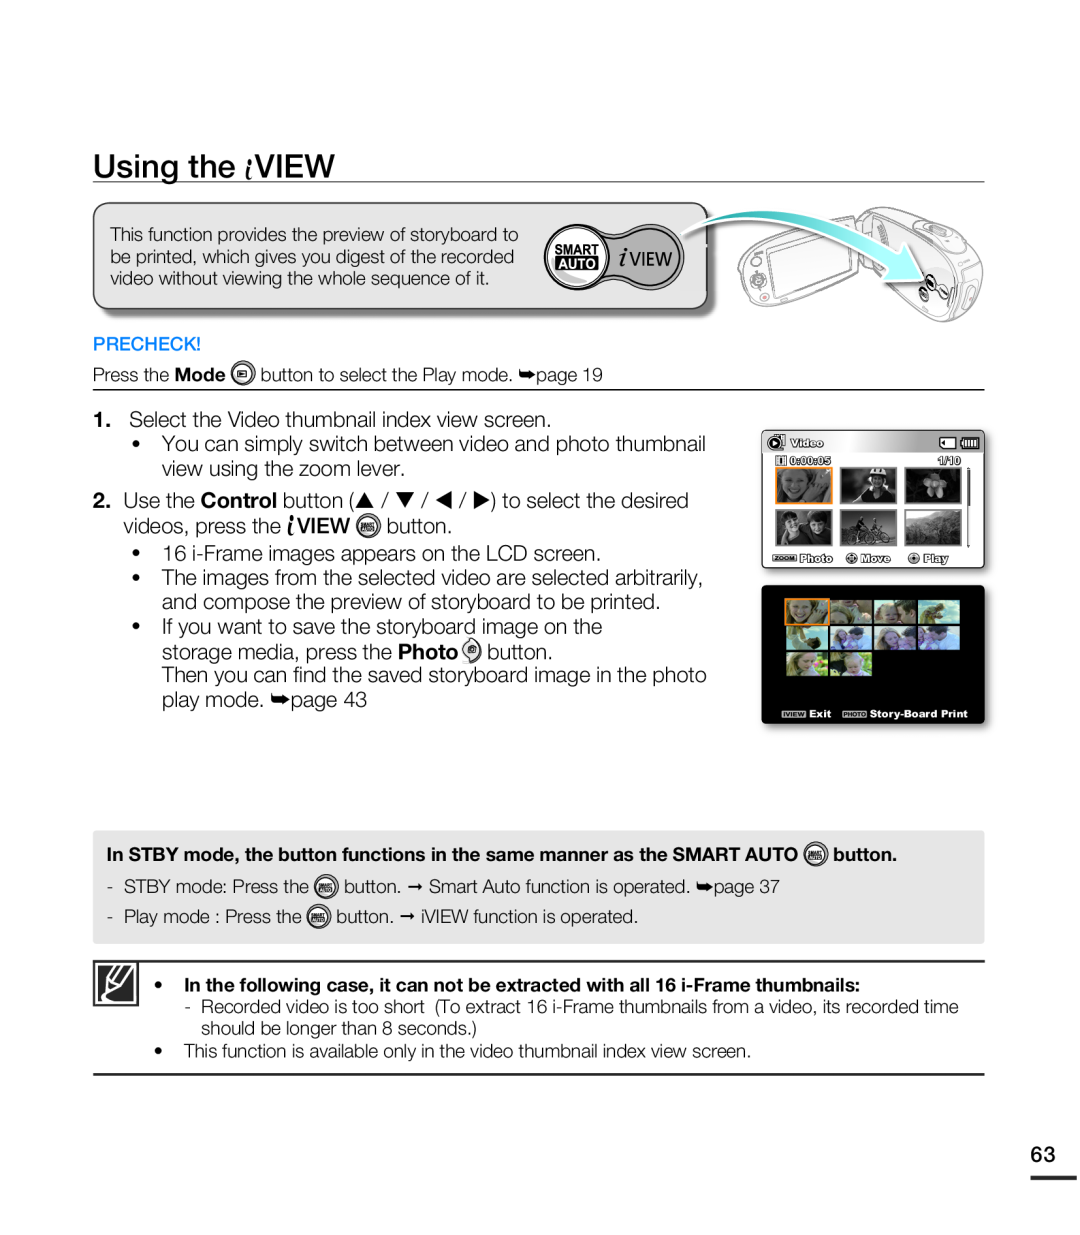 Samsung SMX-C20RP/XIL manual Select the Video thumbnail index view screen, videos, press the VIEW button, Using the VIEW 